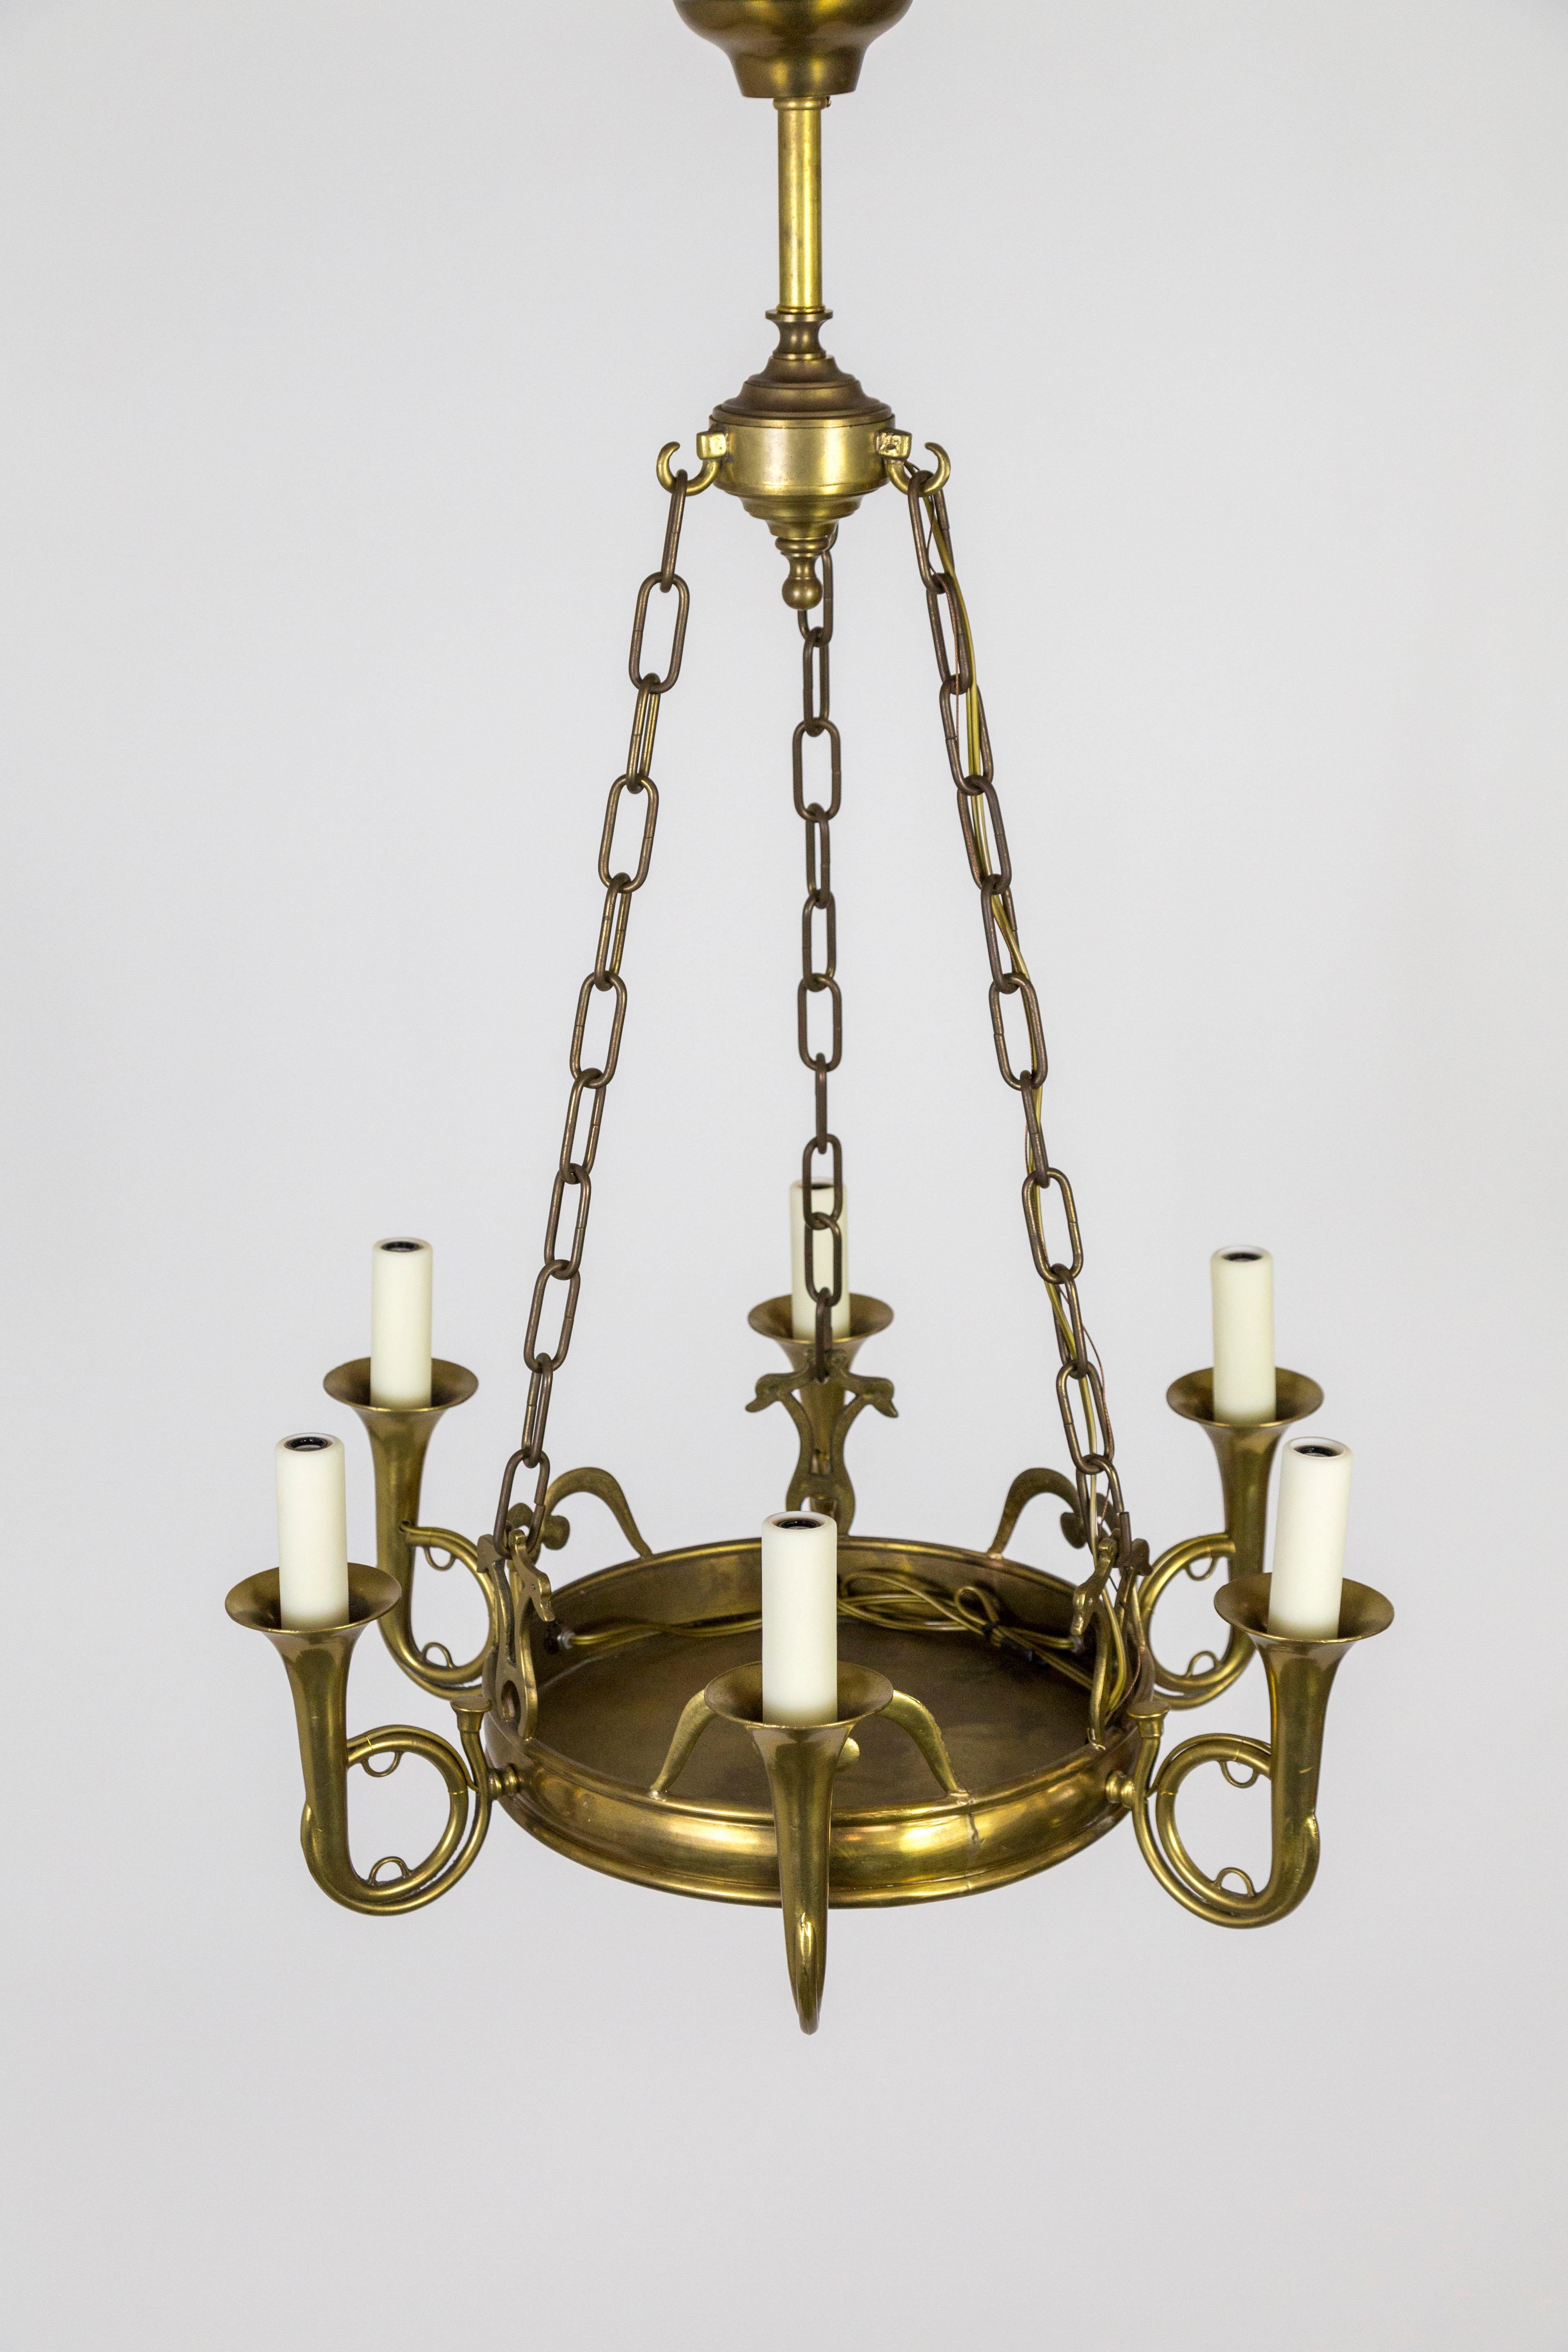 A solid brass chandelier in the form of 6 French horns pointing up with candle-style lights surrounding a large, flat dish. A streamlined, well-crafted design with 3 chains to center finial top finial, with a short stem to the canopy. Early 20th